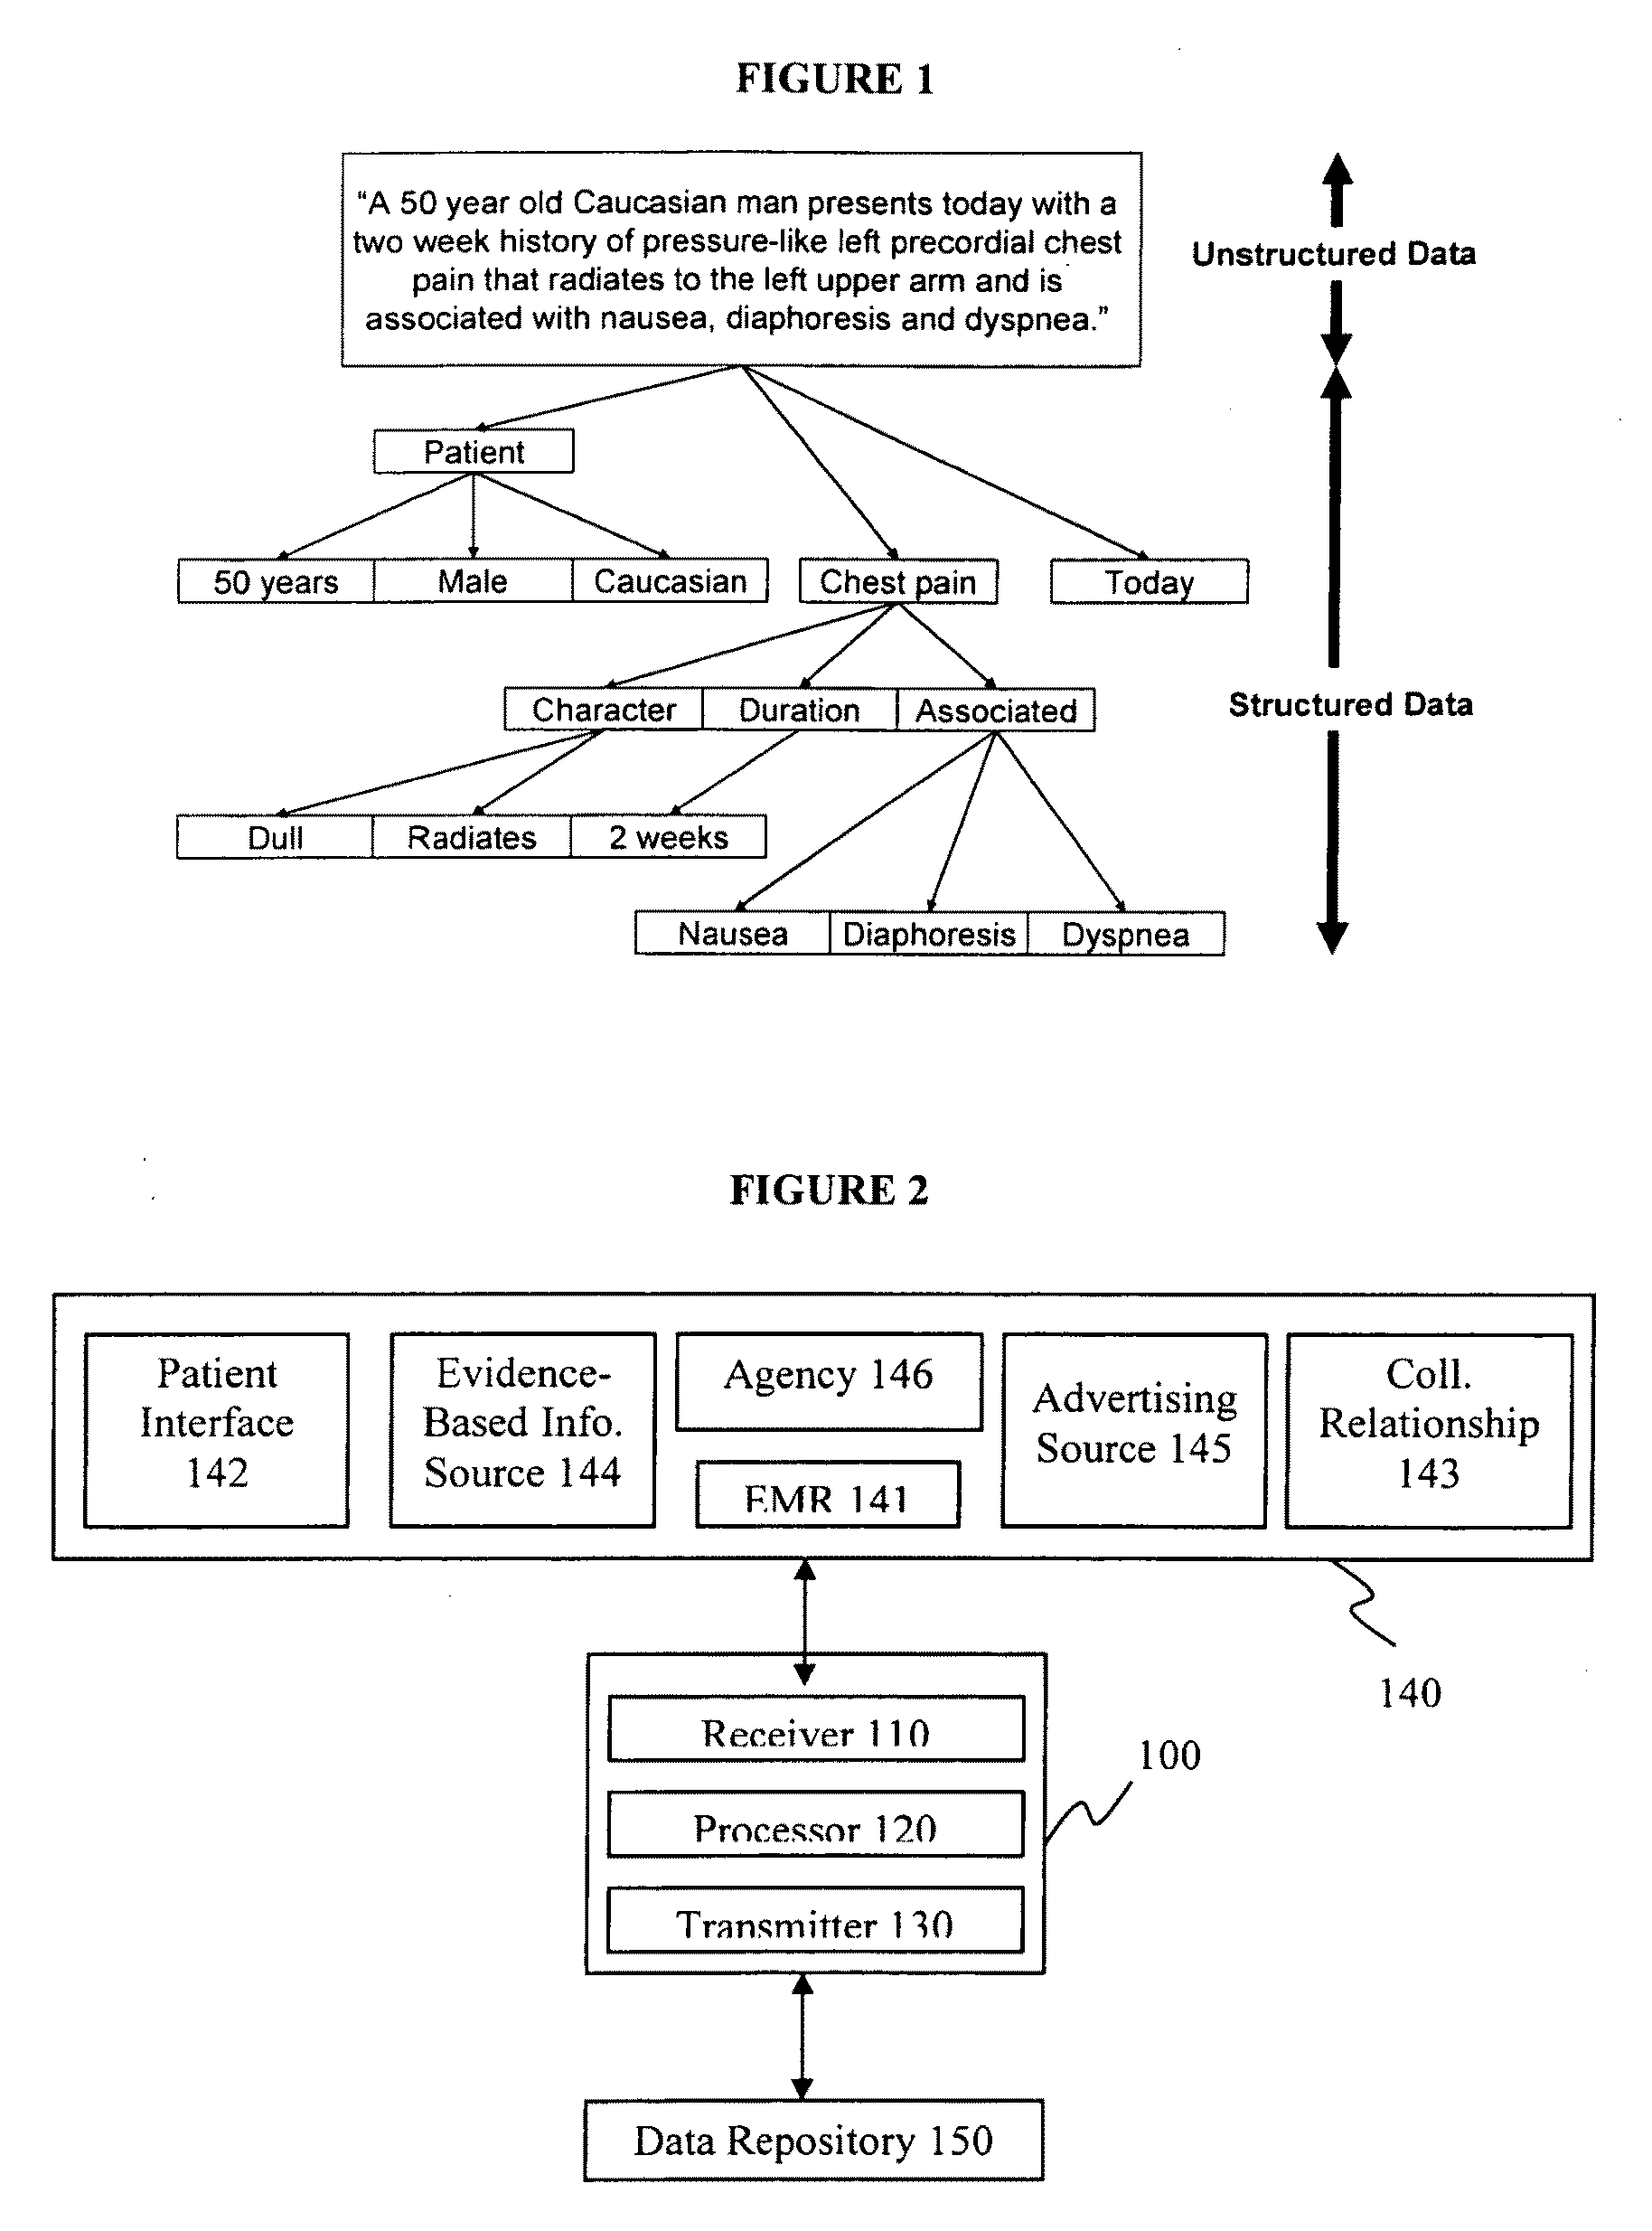 Apparatus and method for managing electronic medical records embedded with decision support tools